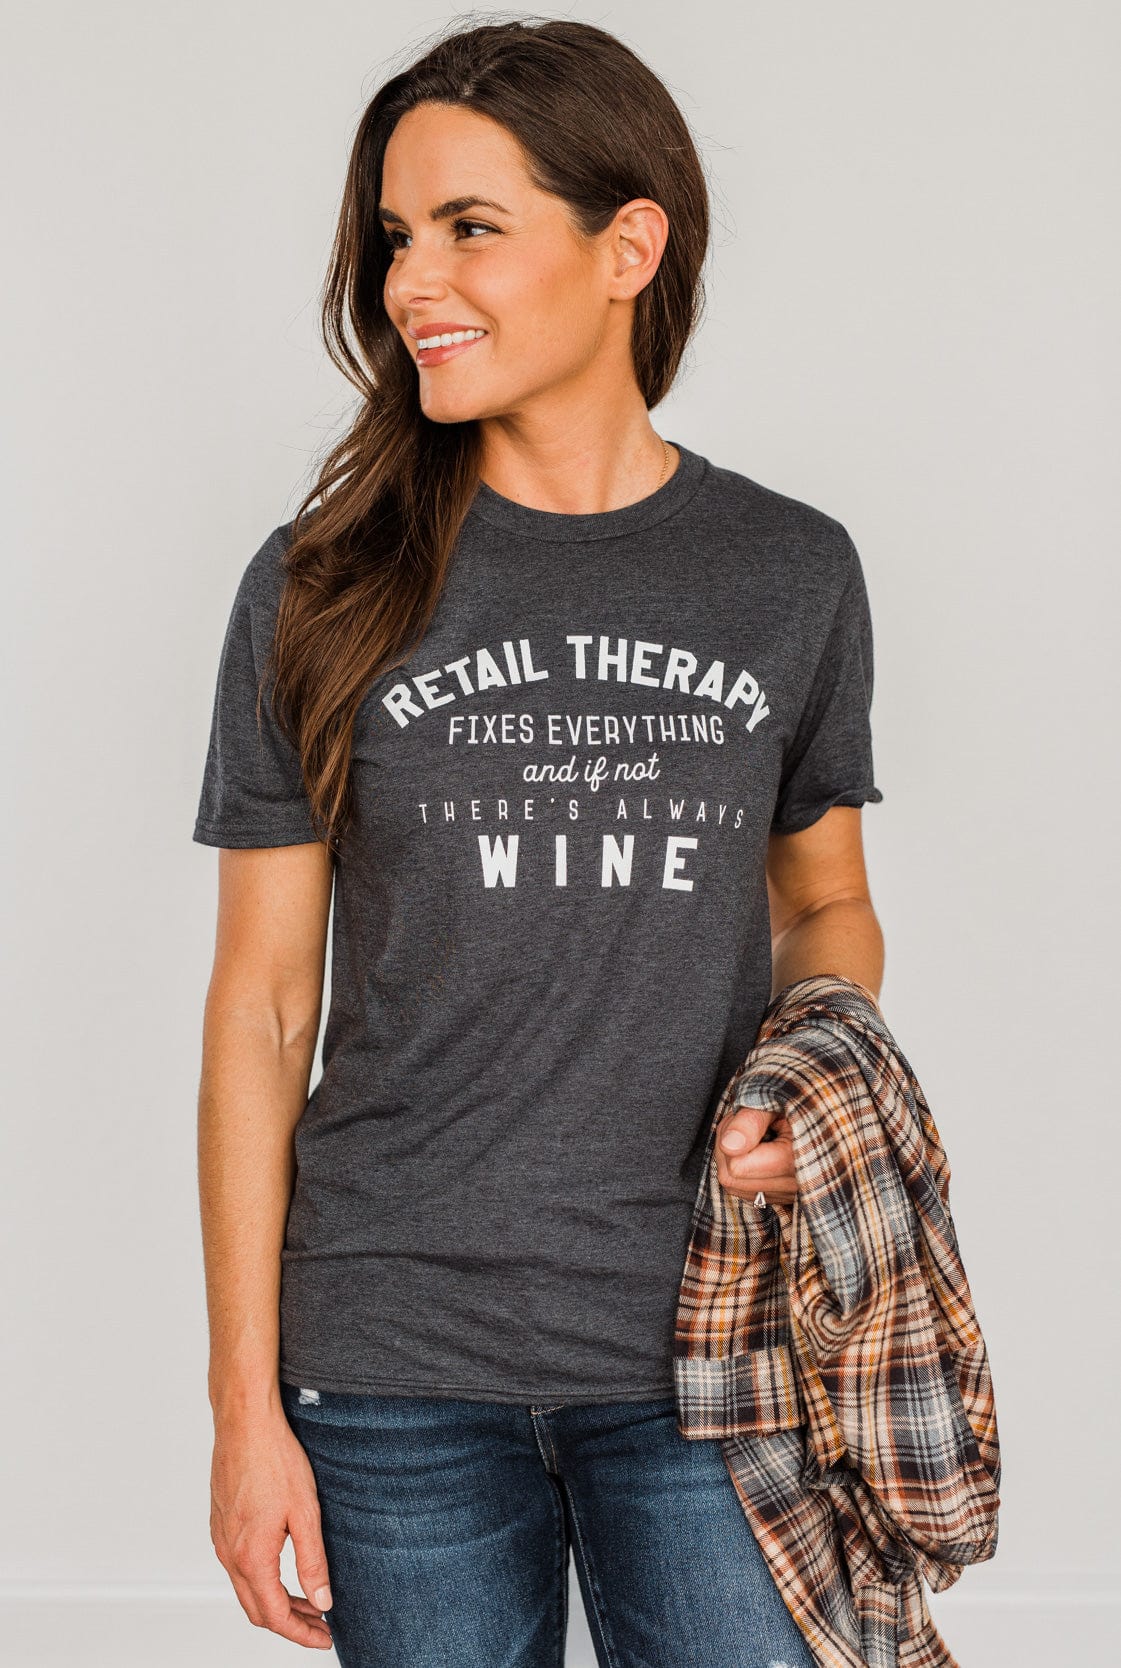 "Retail Therapy Fixes Everything.." Graphic Tee- Charcoal